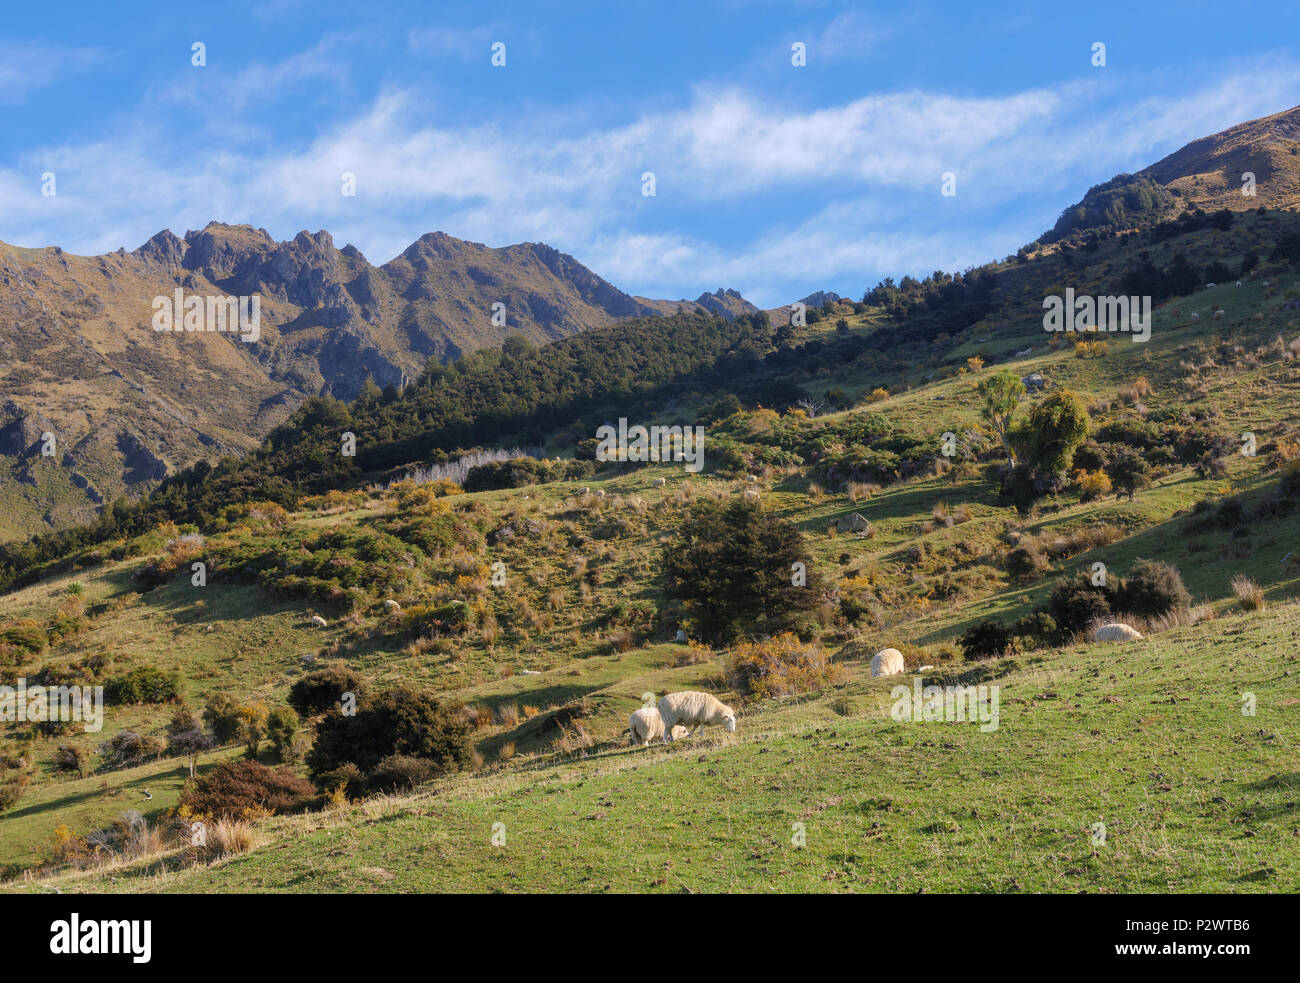 Sheep in a green meadow and mountains in the background in the Southern Scenic Route, New Zealand Stock Photo